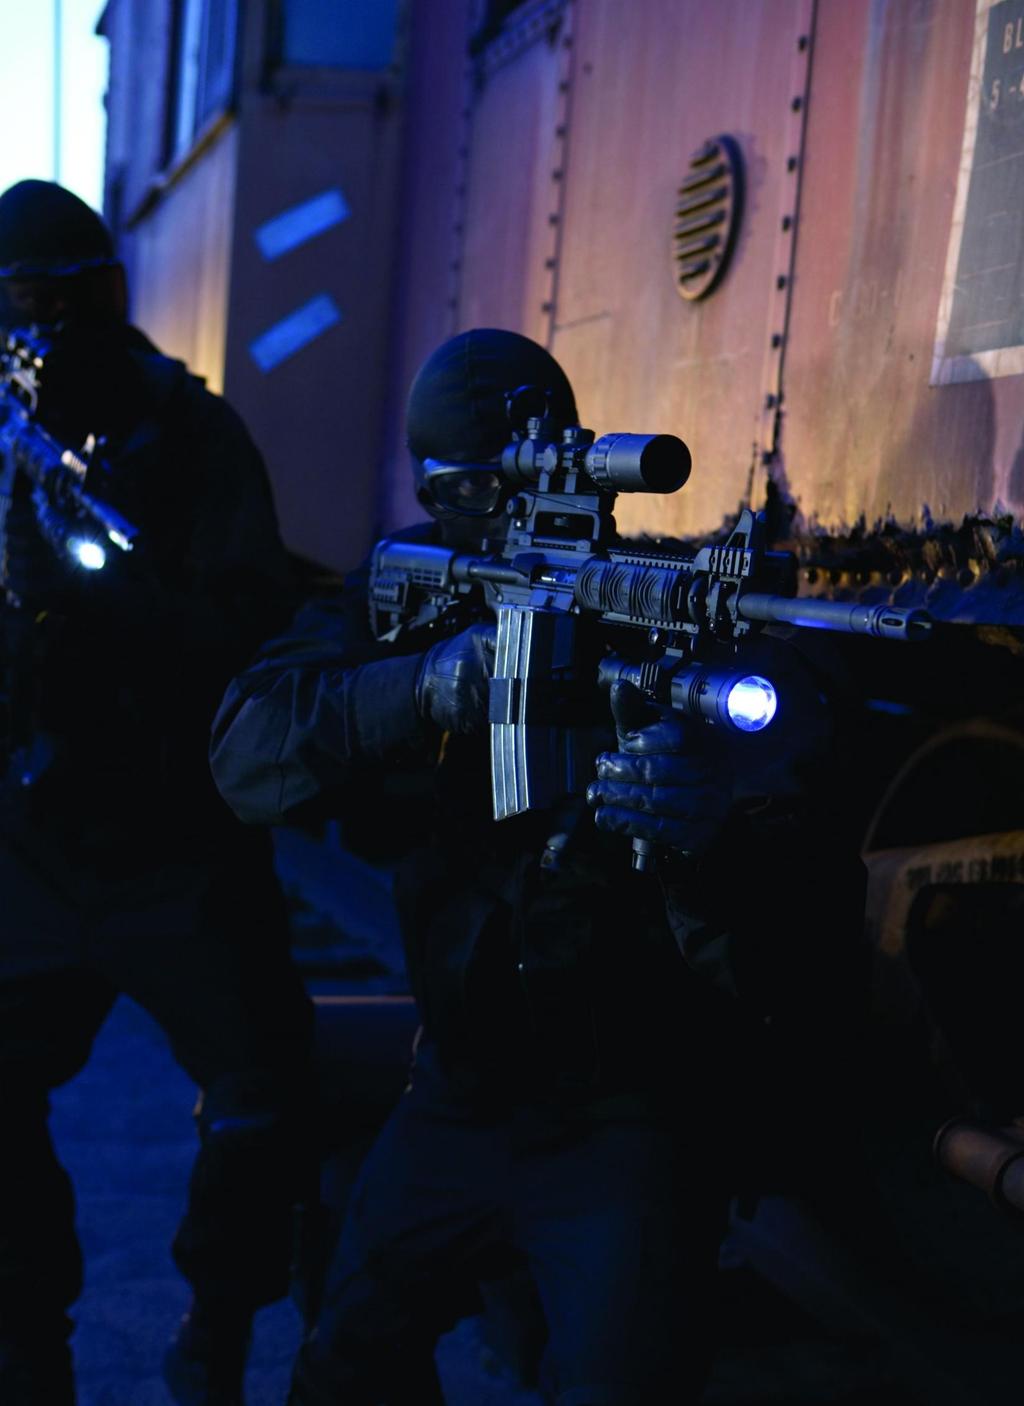 15 Weapon Lights The introduction and application of the weapon lights greatly improved the efficiency of tactical operations, especially in a dark environment.